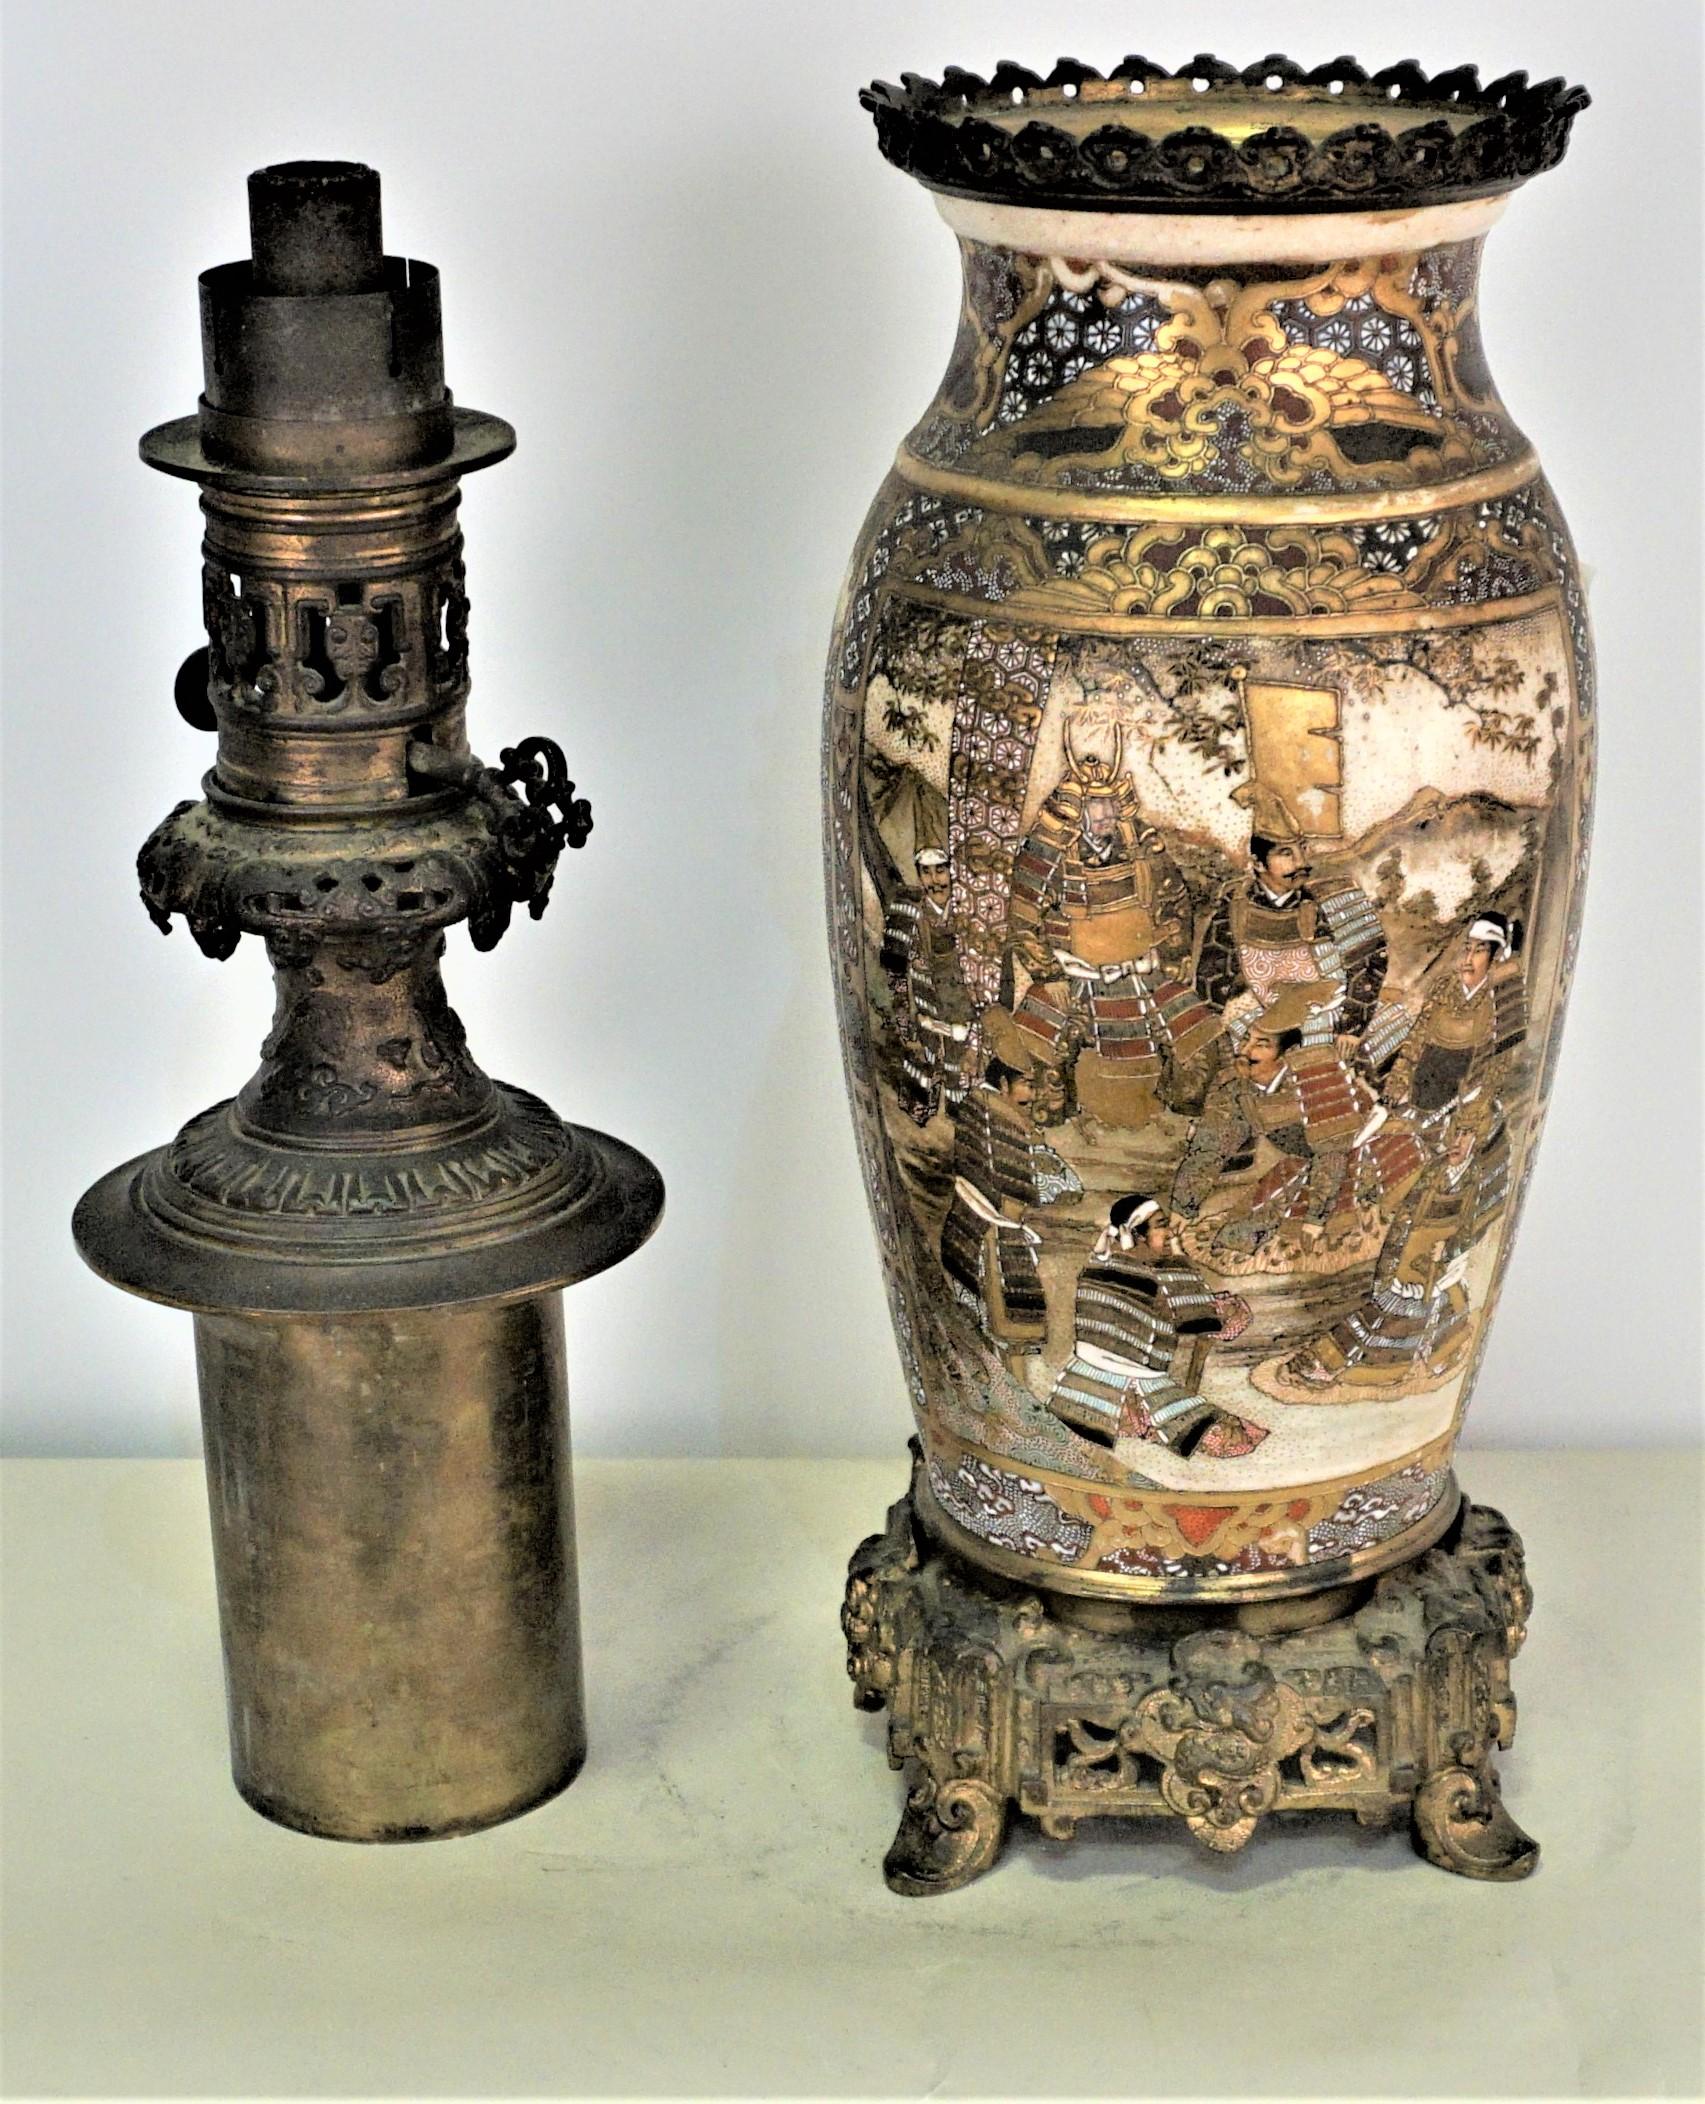 Magnificent pair of Japanese gold Satsuma with hand painted Samurai warriors and court seen mounted in French bronze hardware as oil lamps.
Satsuma porcelain was well know in Western world and highly sought after and some were used as base for oil